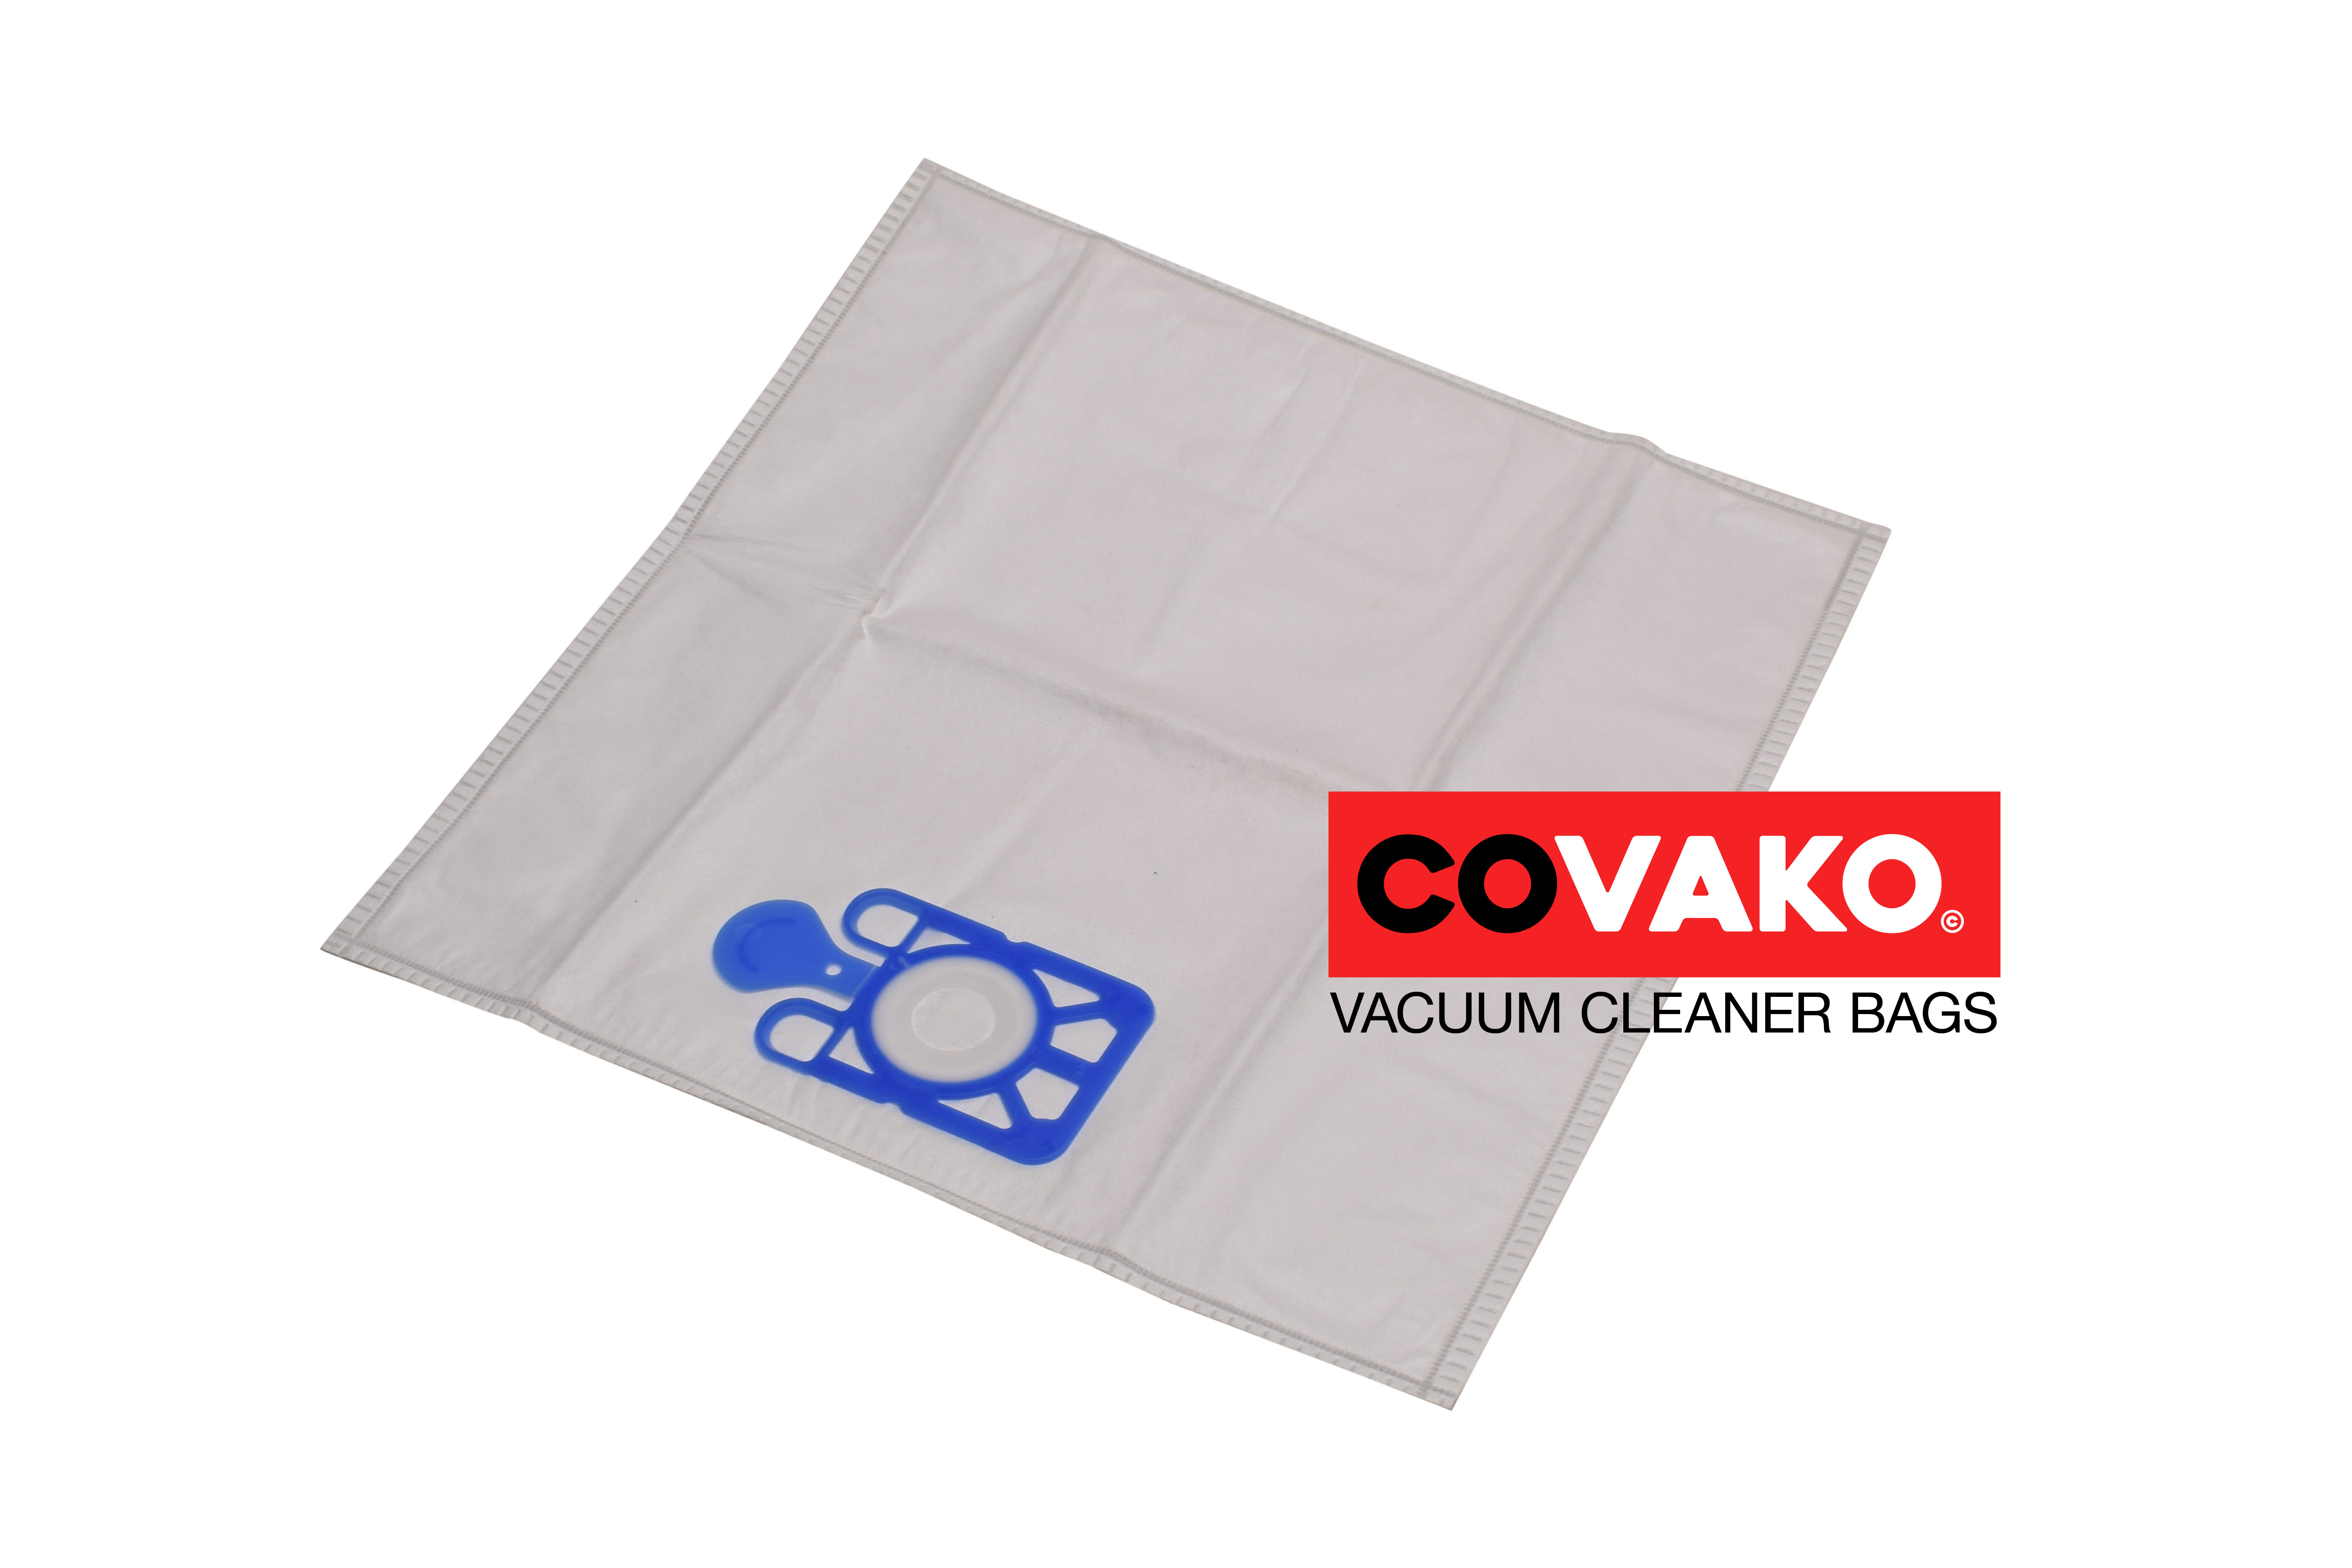 Numatic PPT 220-12 / Synthesis - Numatic vacuum cleaner bags